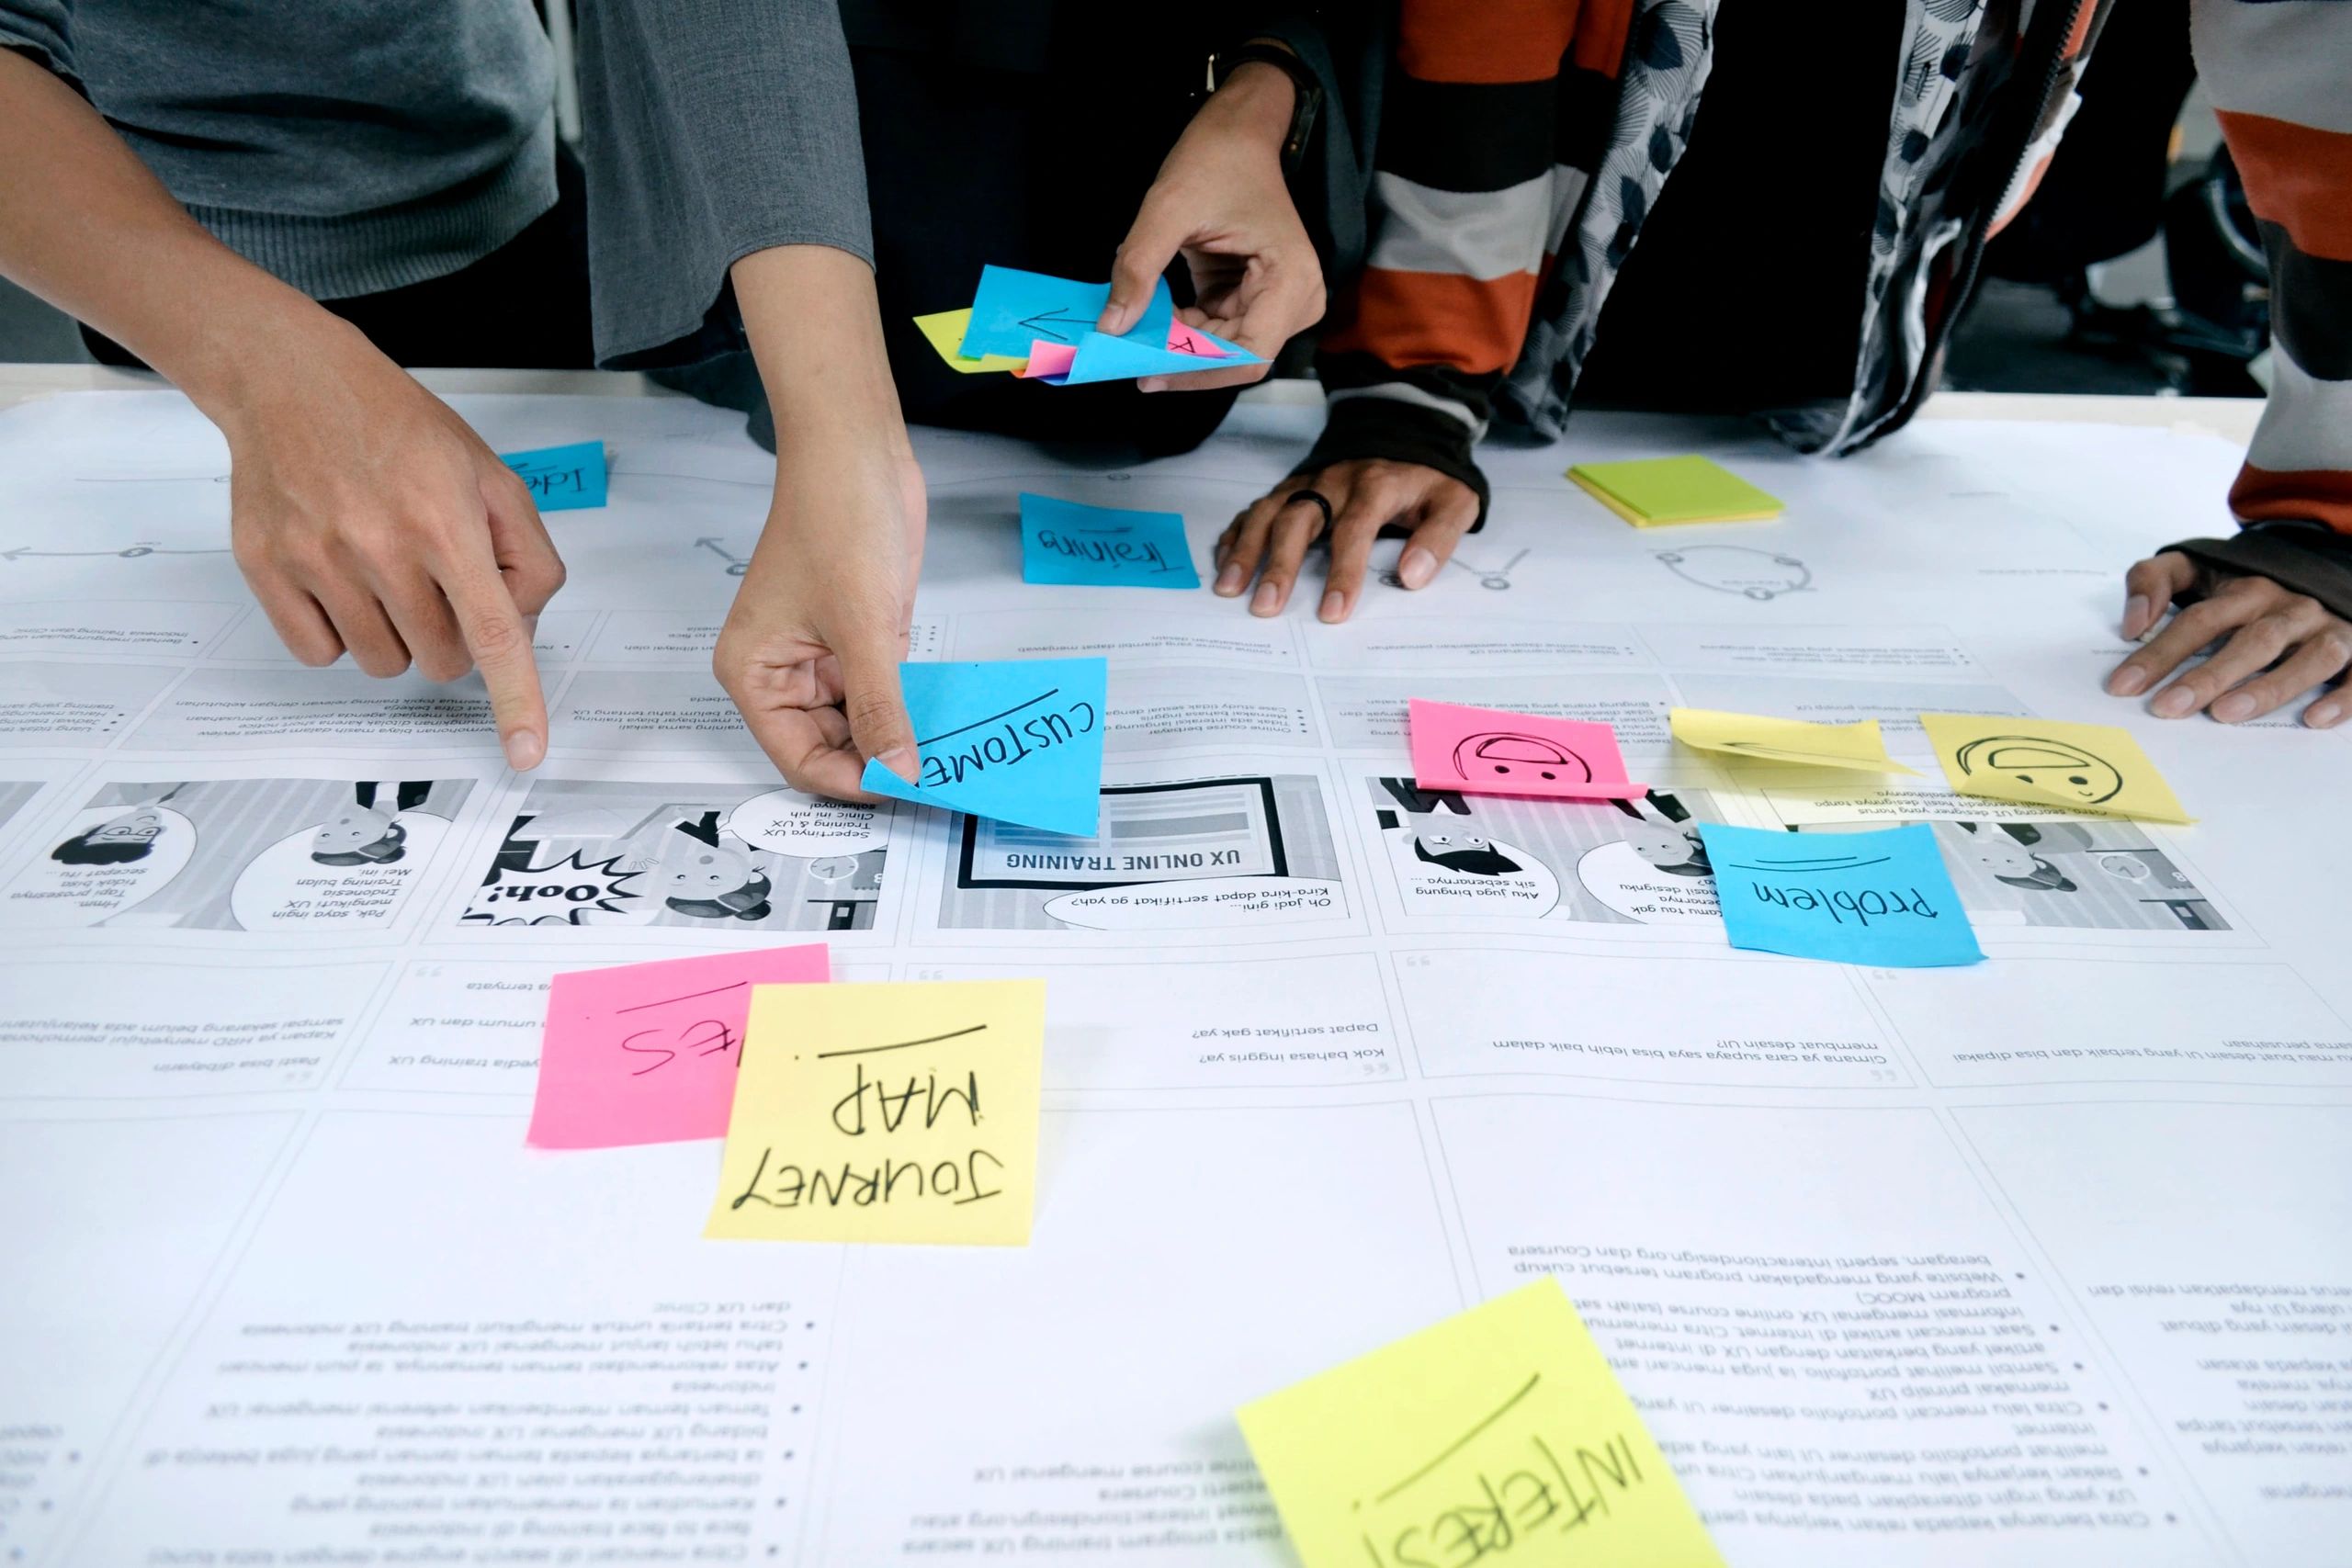 User Journey Mapping Workshop